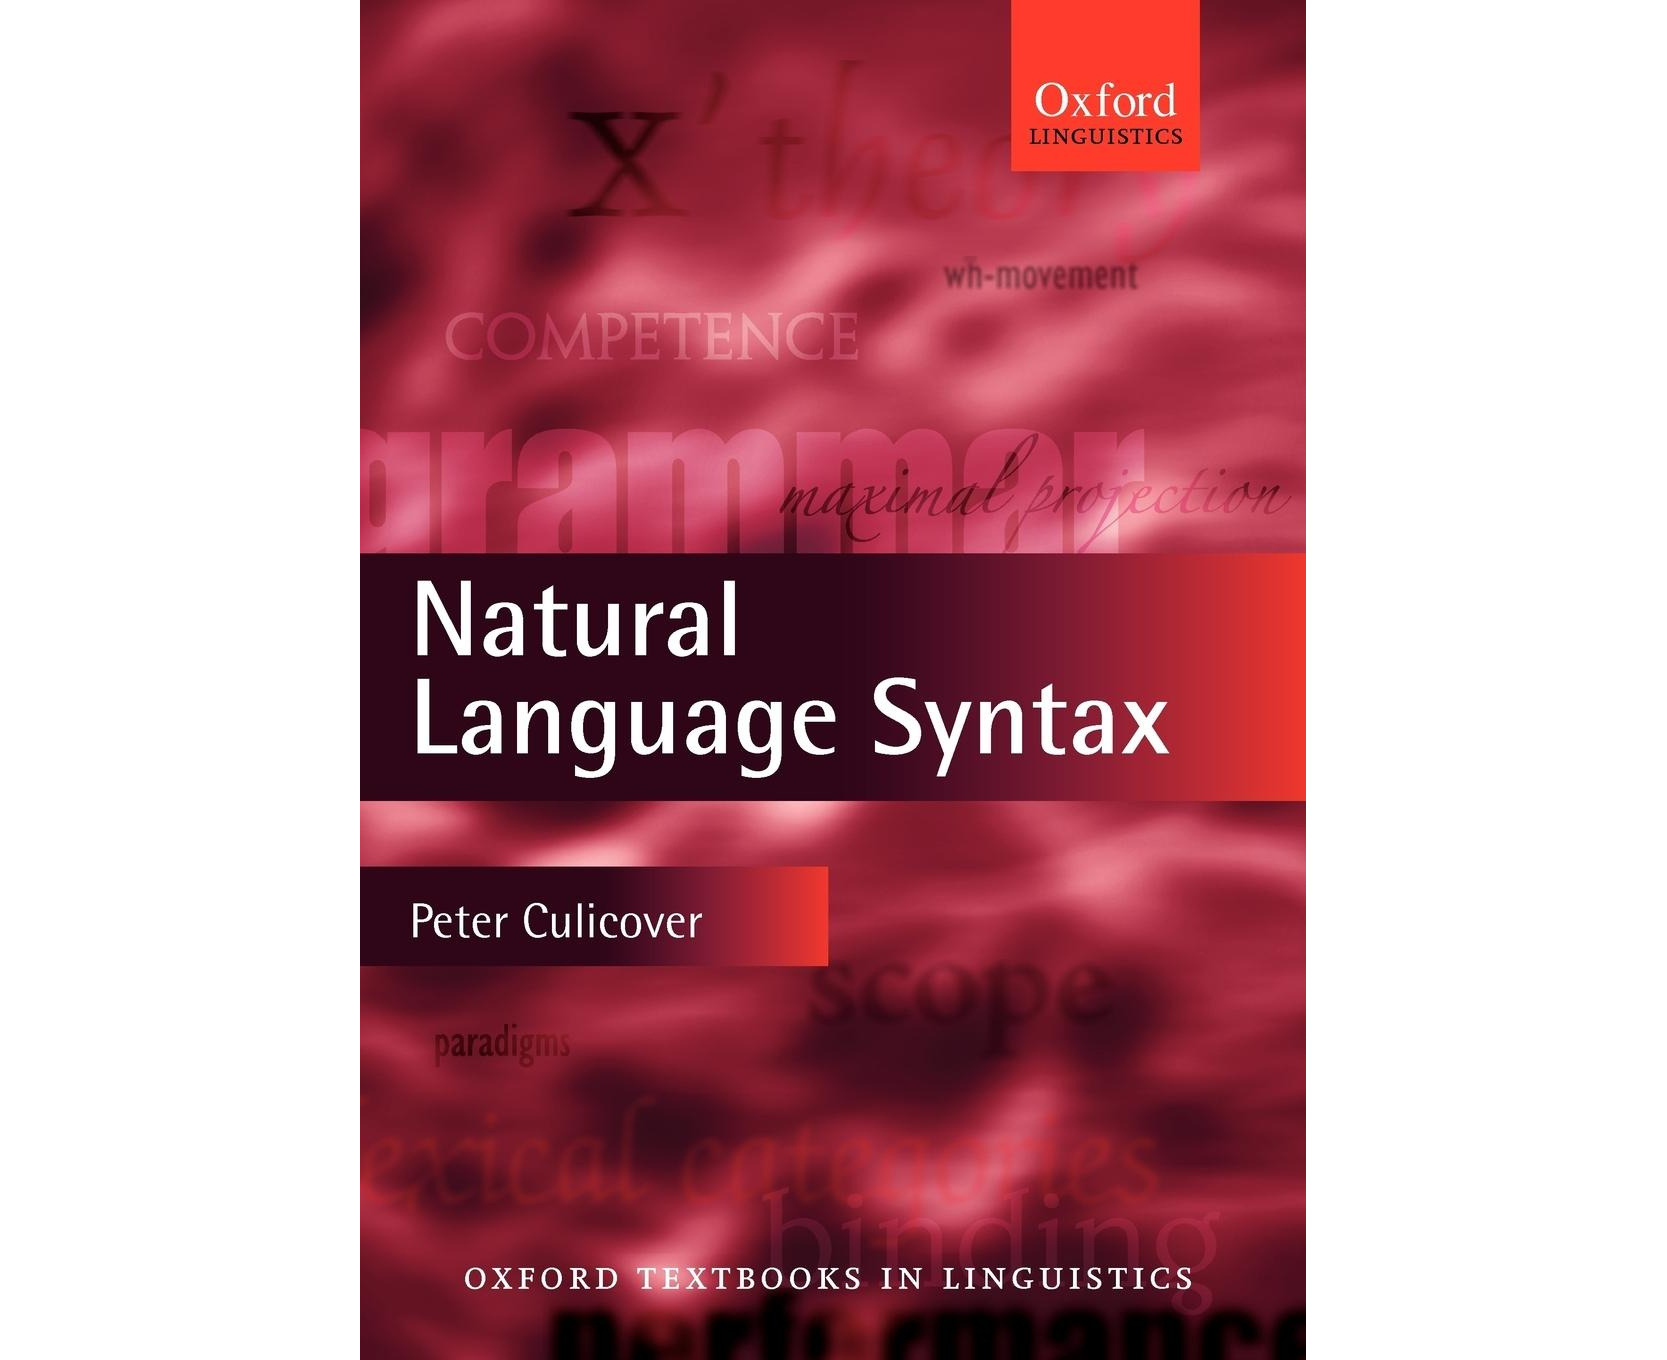 (Oxford　Syntax　Textbooks　Natural　Linguistics)　Language　in